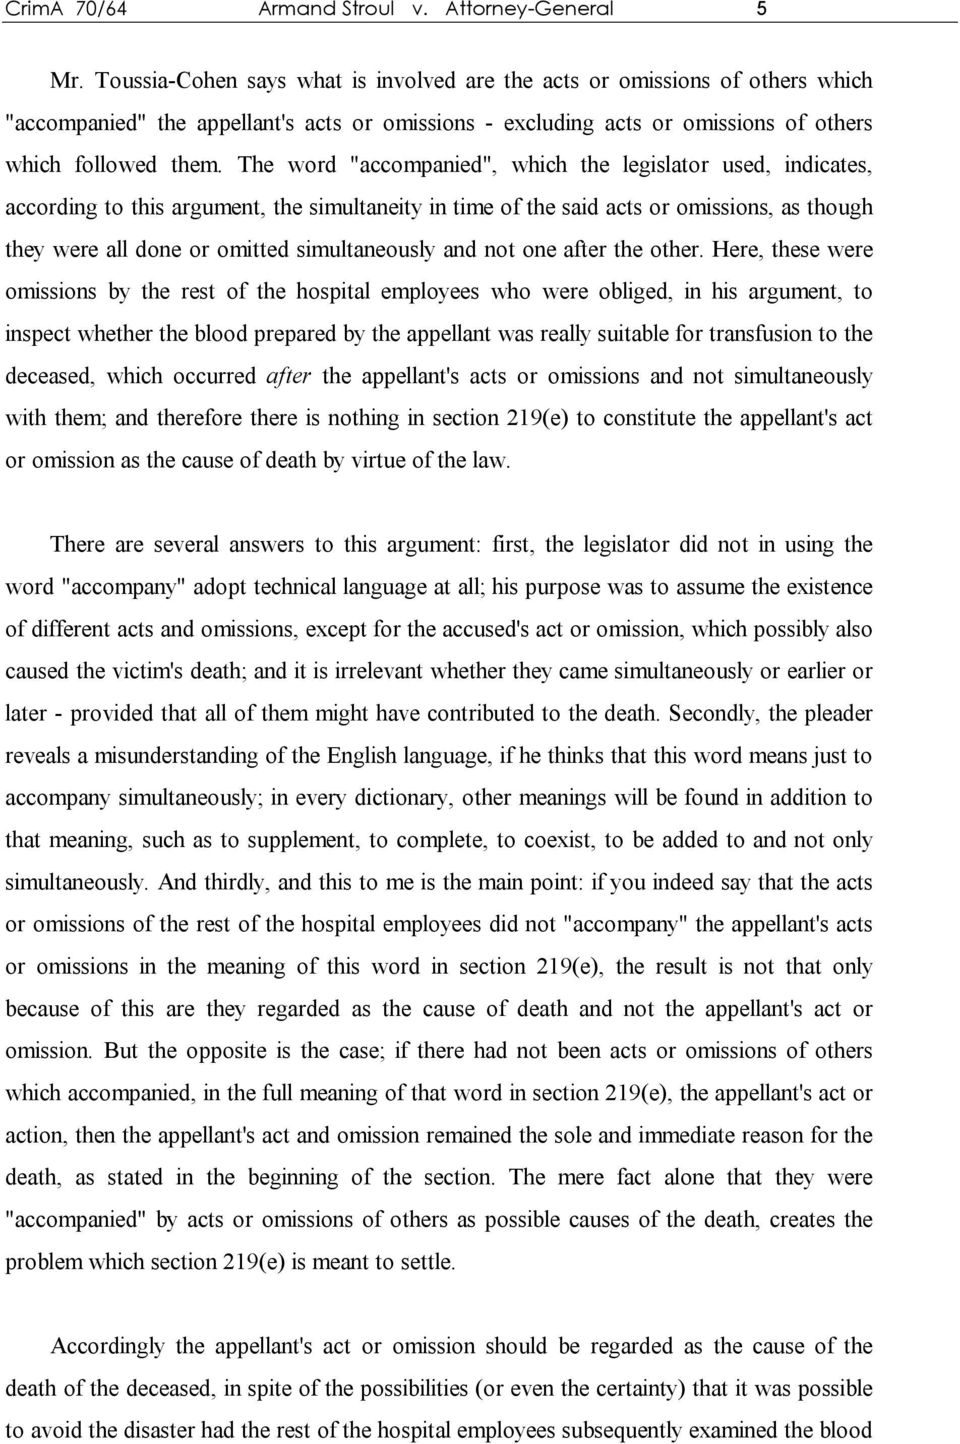 The word "accompanied", which the legislator used, indicates, according to this argument, the simultaneity in time of the said acts or omissions, as though they were all done or omitted